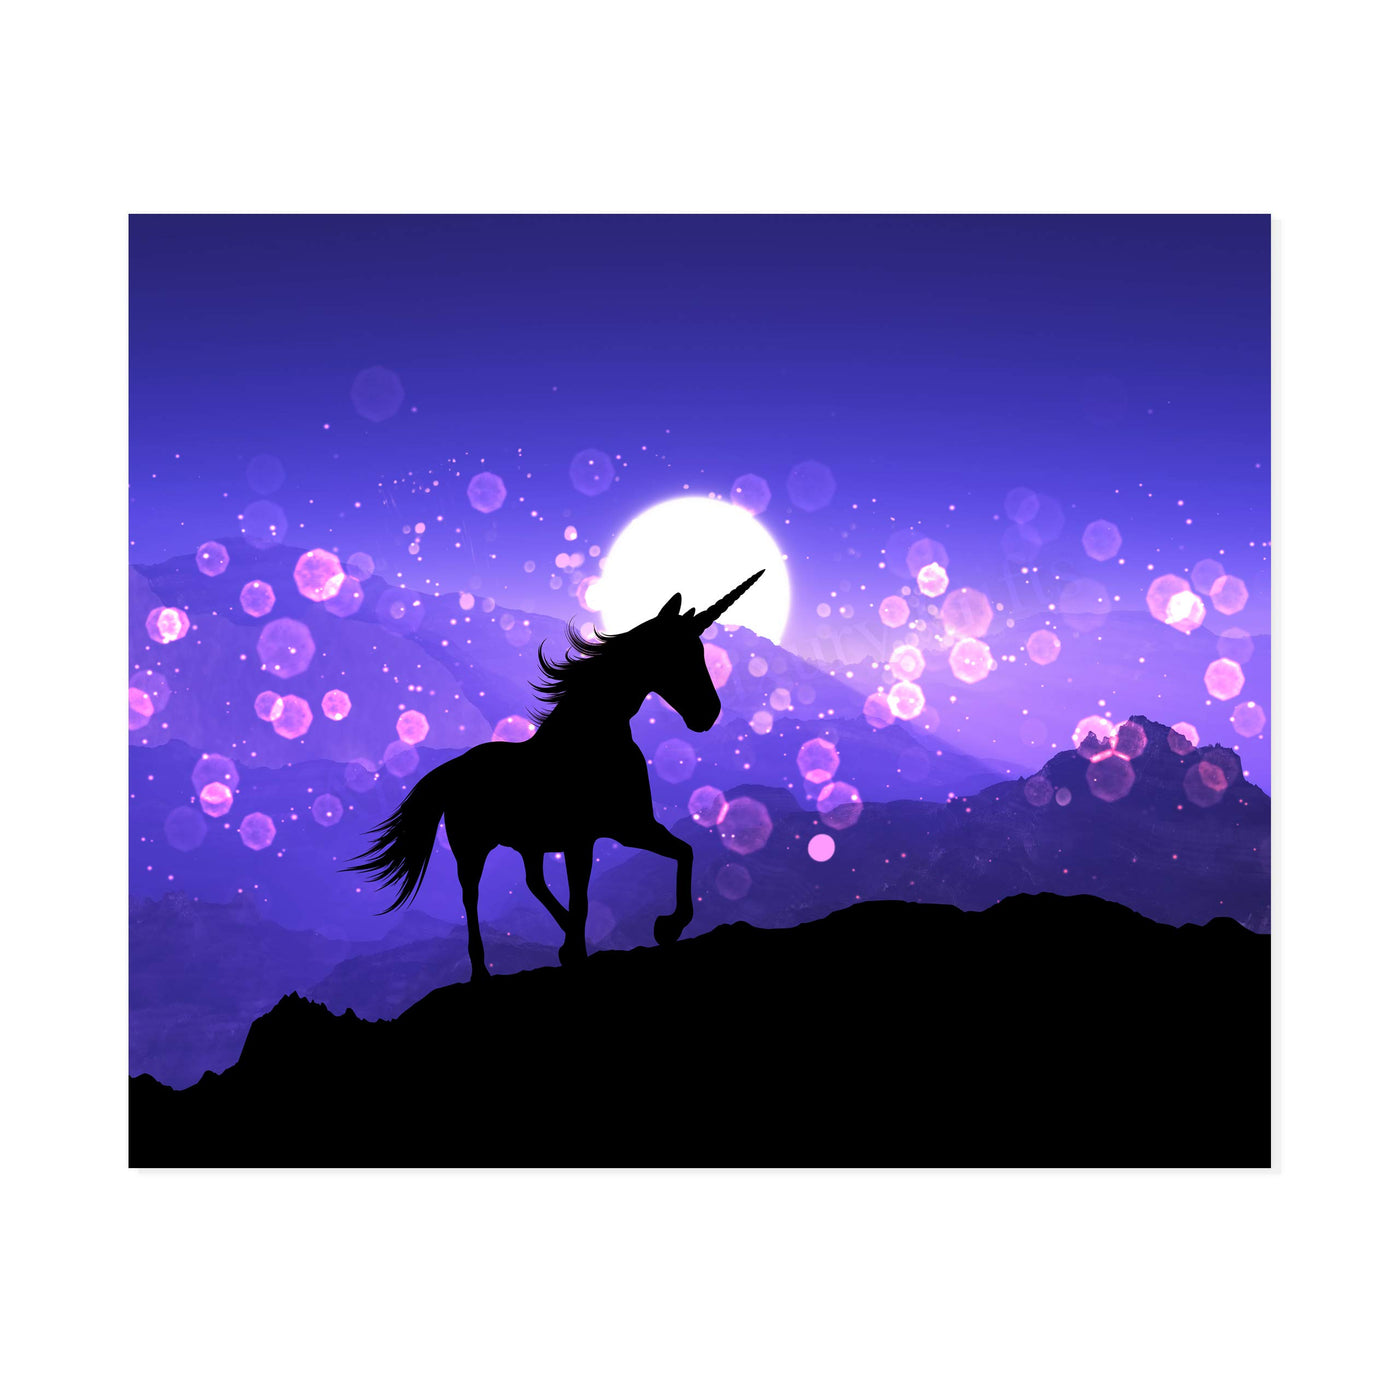 Magical Unicorn Under the Moon- 10 x 8" Wall Art Print- Ready to Frame. Home-Girls Bedroom-Nursery-Play Room Decor. Wall Prints for Animal Themes & Children's Wall Decor. Cute, Girly Decoration!